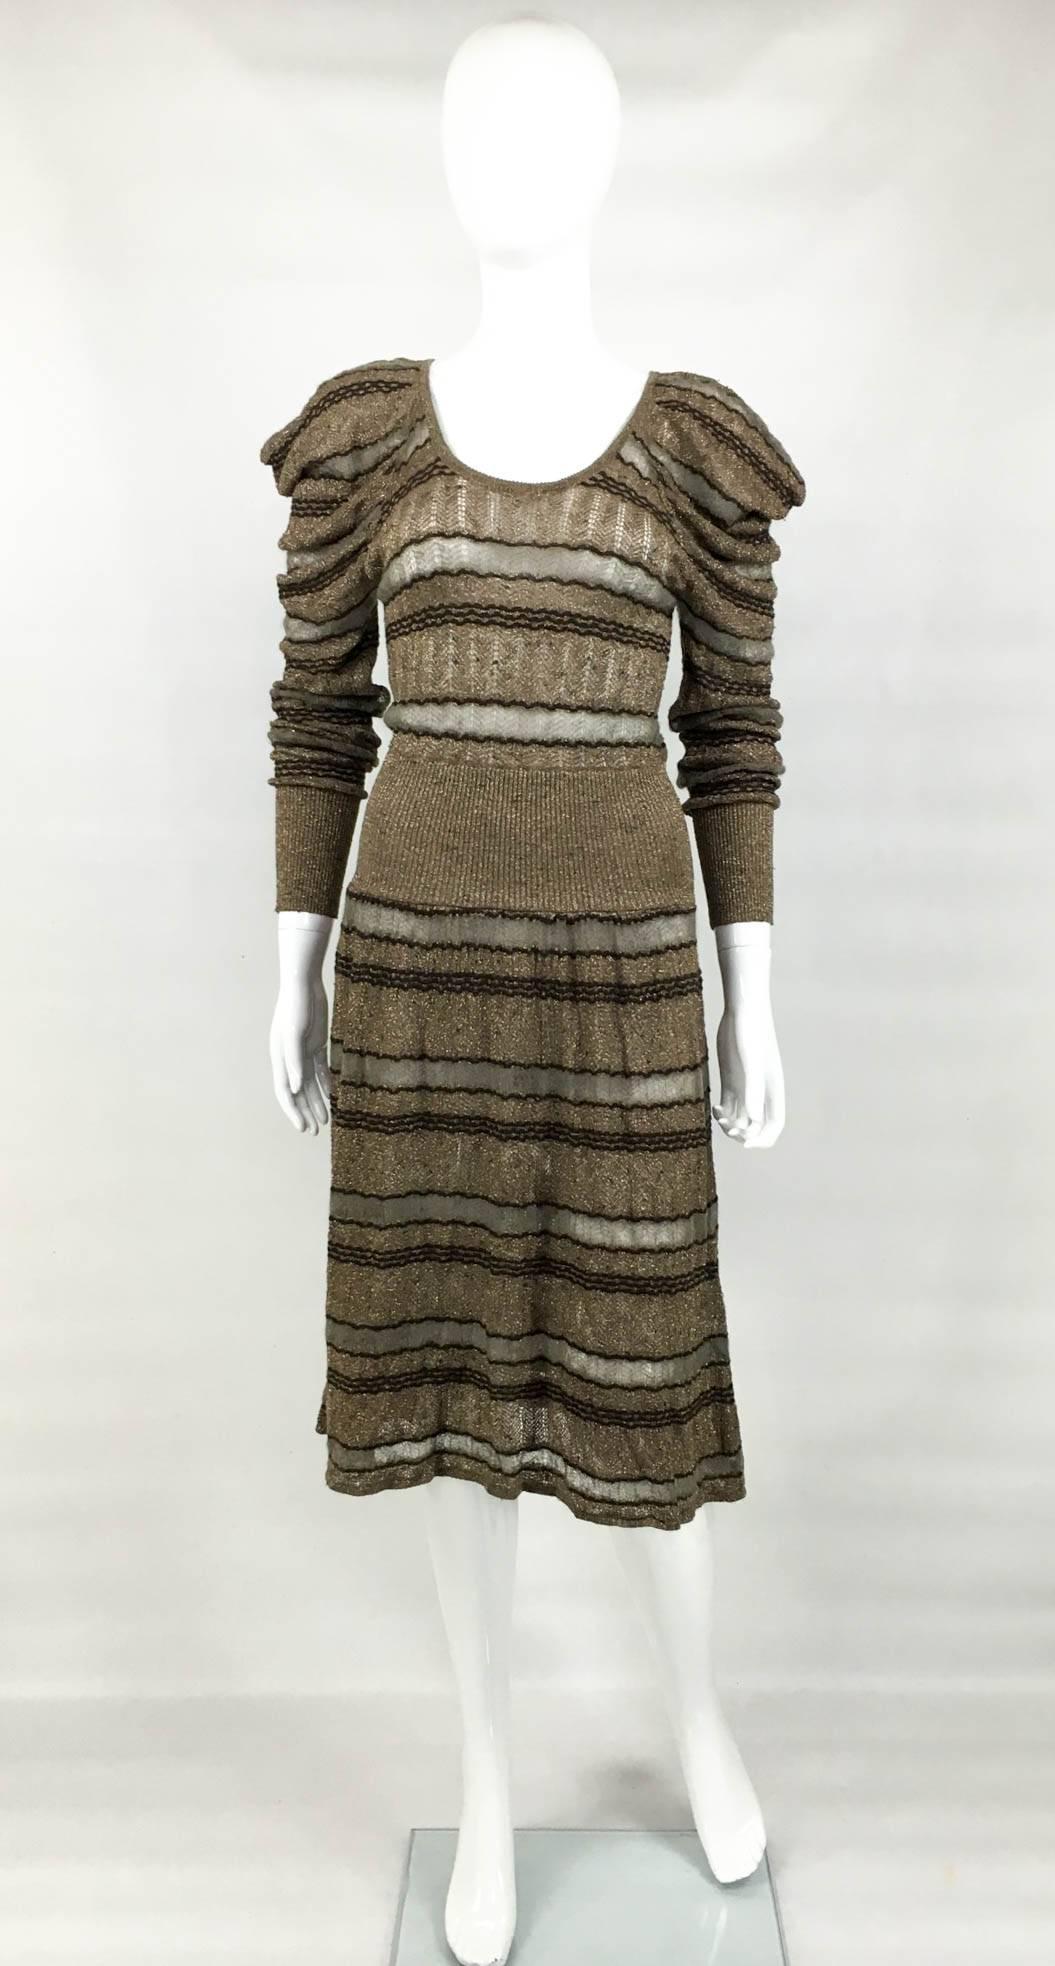 Vintage Kenzo Lurex Knitted Long Sleeve Dress. This striking dress by Kenzo features exaggerated shoulders and scoop neckline. In stripes, the knit is somewhat sheer, with the light grey stripe being the sheerest. The cuffs and the waist band are